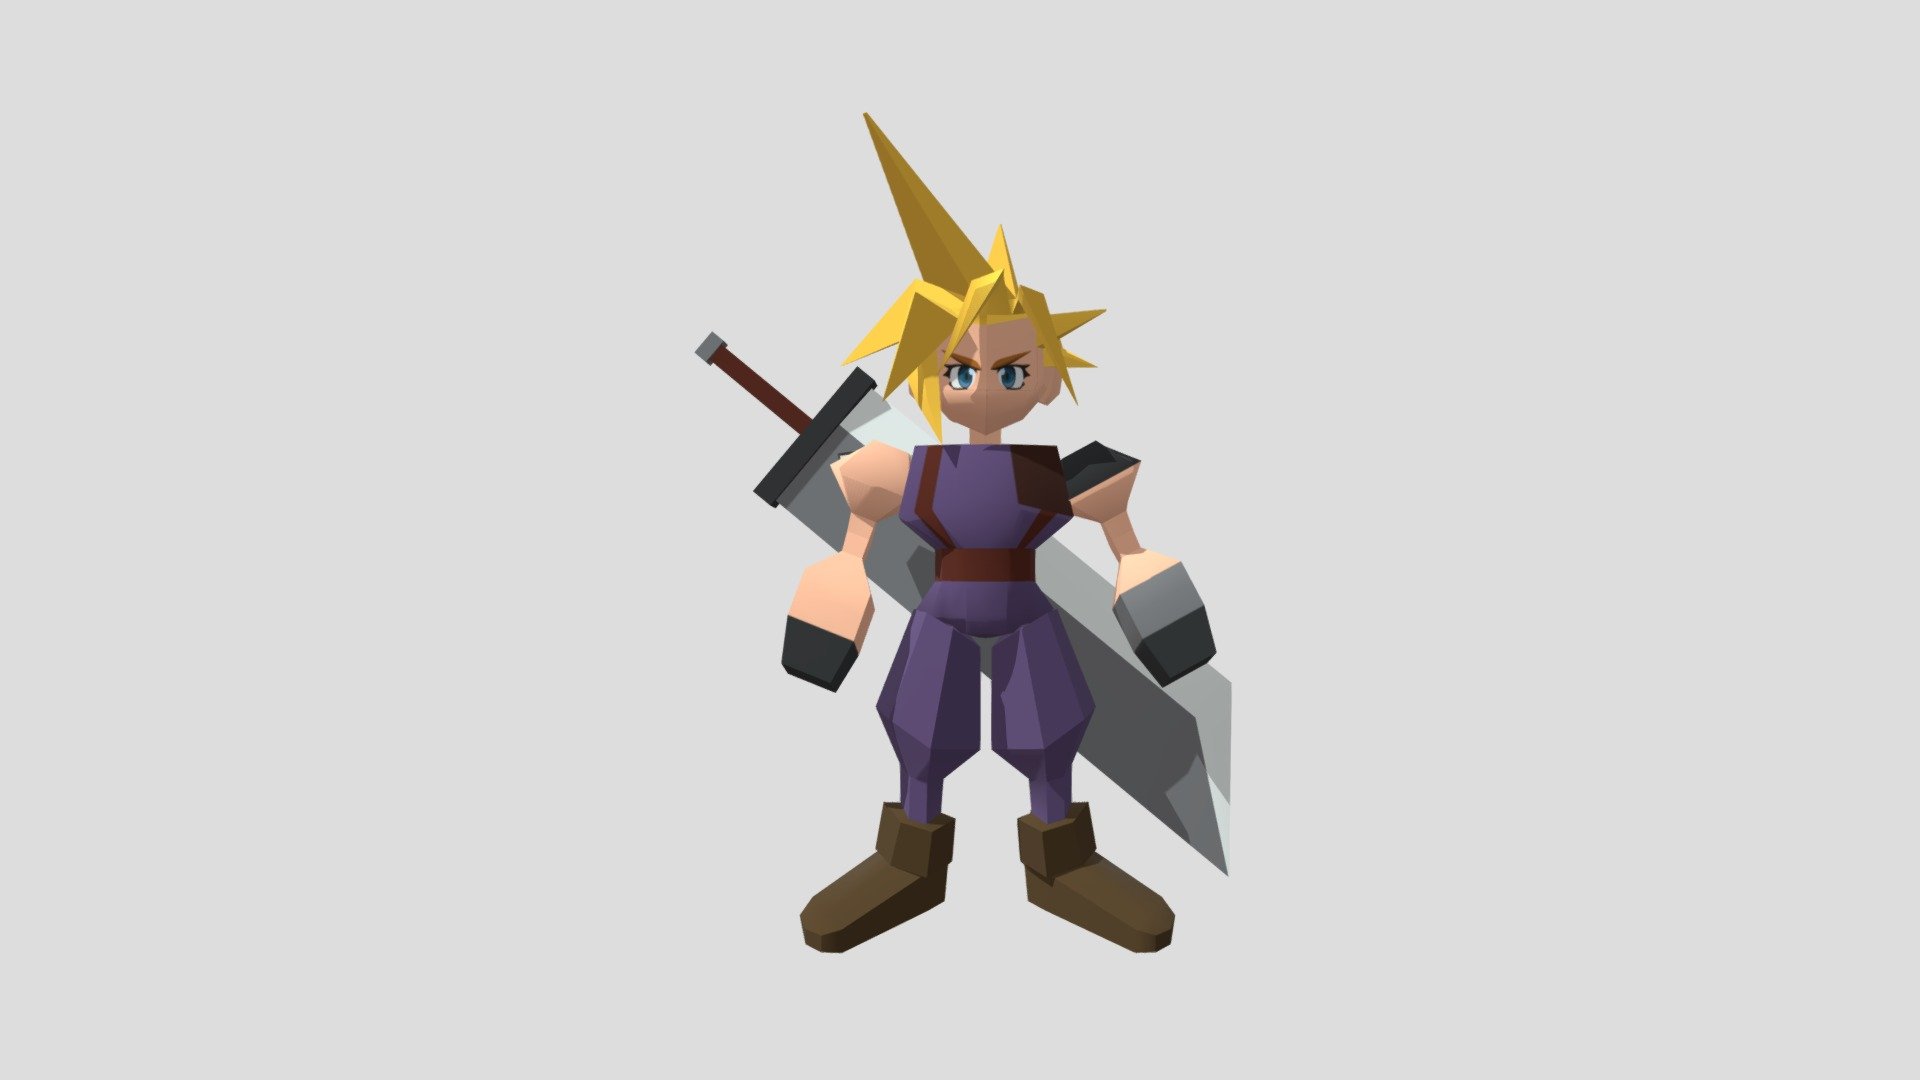 Cloud Strife poyligon version done in MAYA. Did my best to be as close to the original but with some modern twist (like more definition on the eyes) 3d model